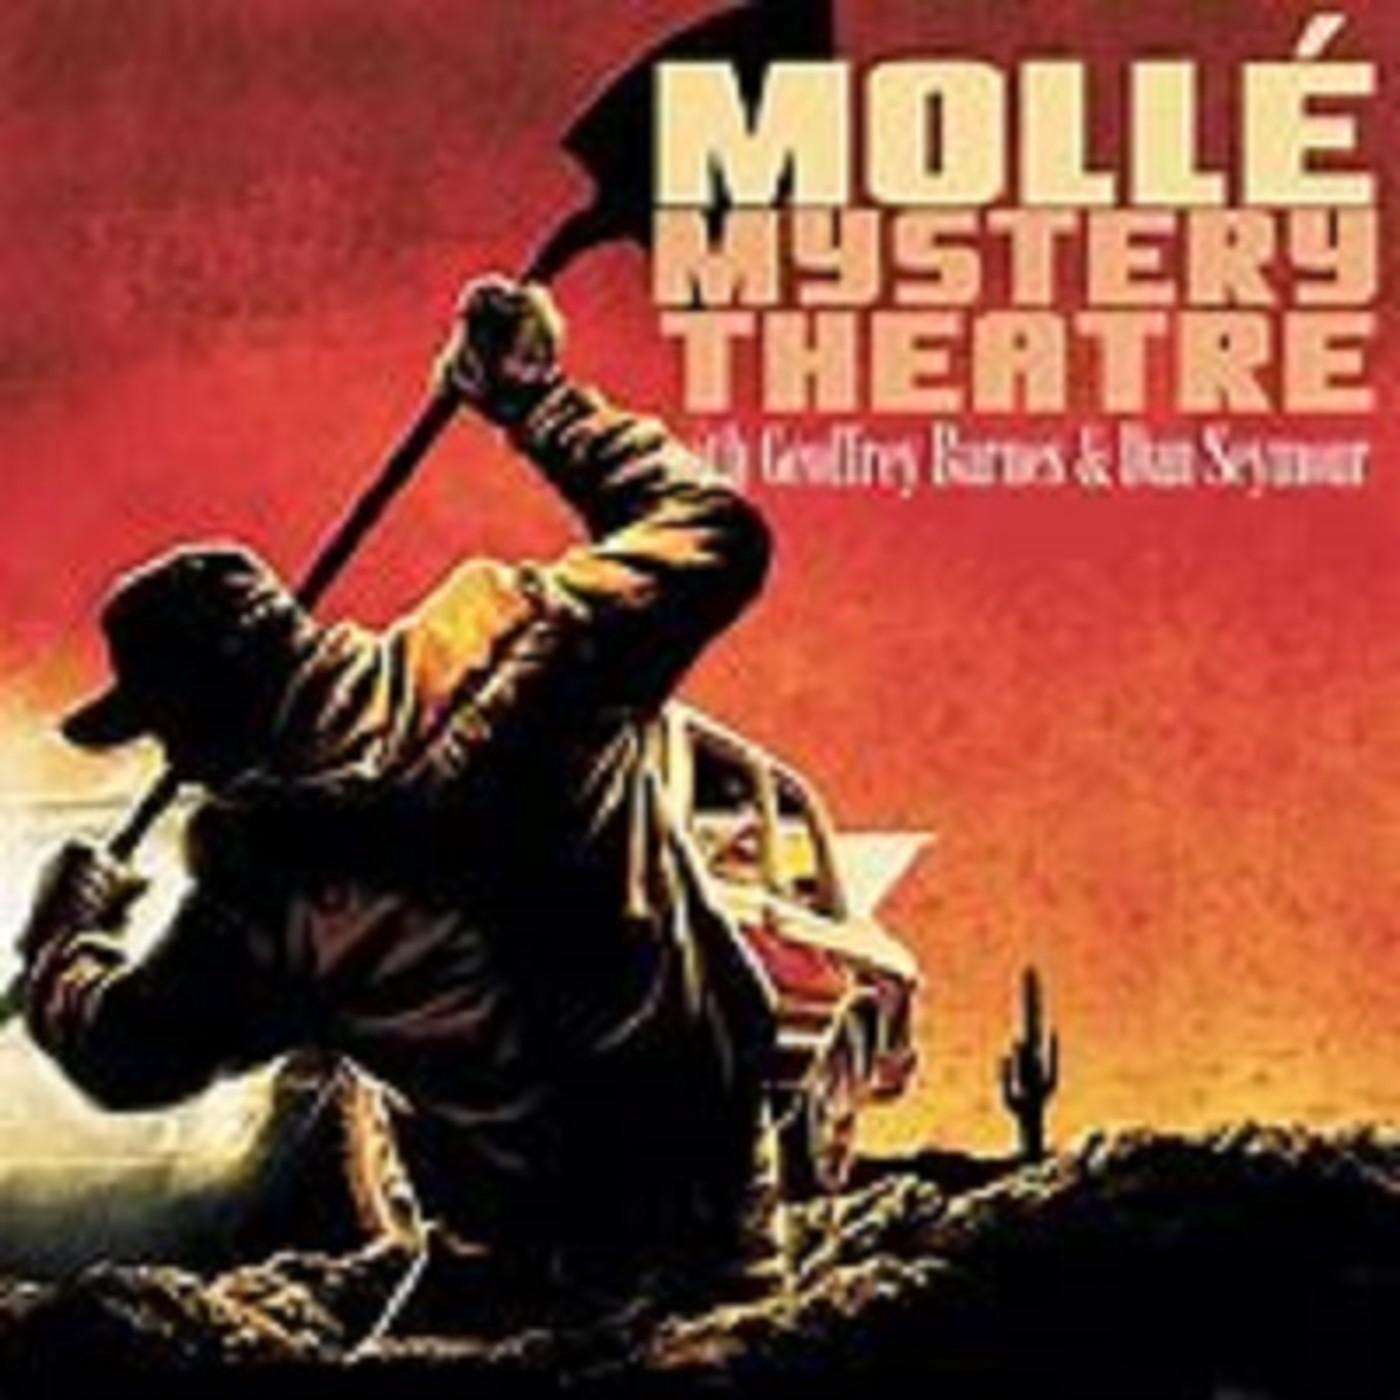 Molle' Mystery Theatre